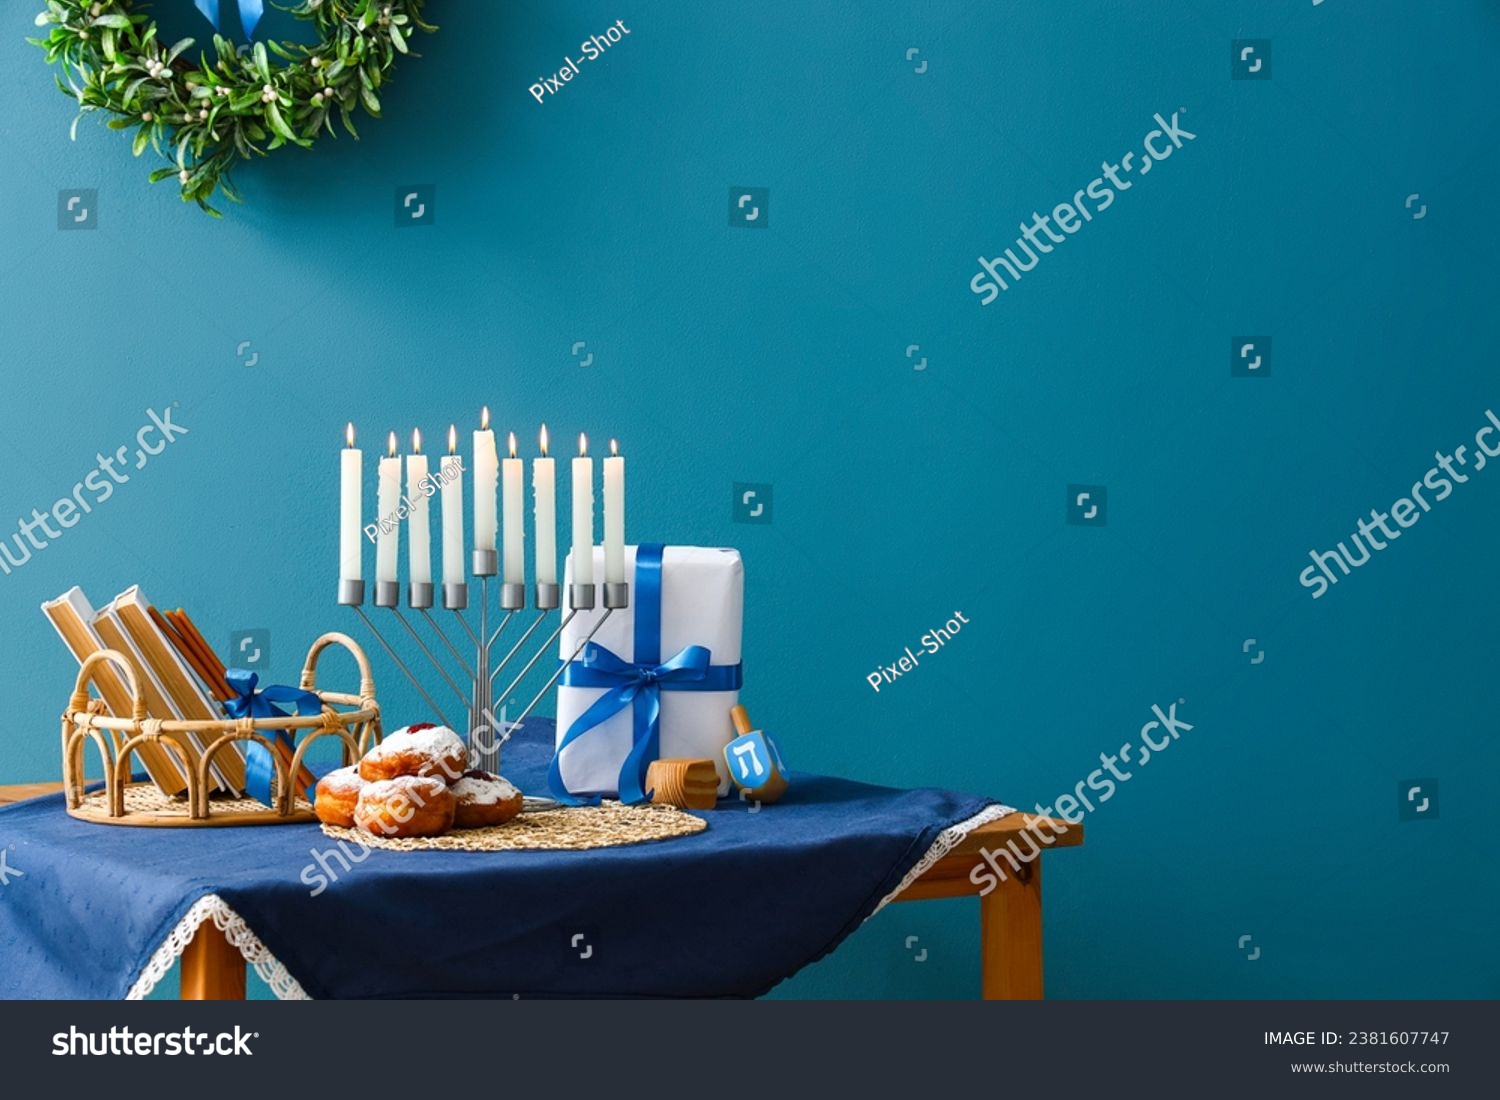 Menorah with donuts, books, dreidels and gift for Hannukah on table near blue wall #2381607747